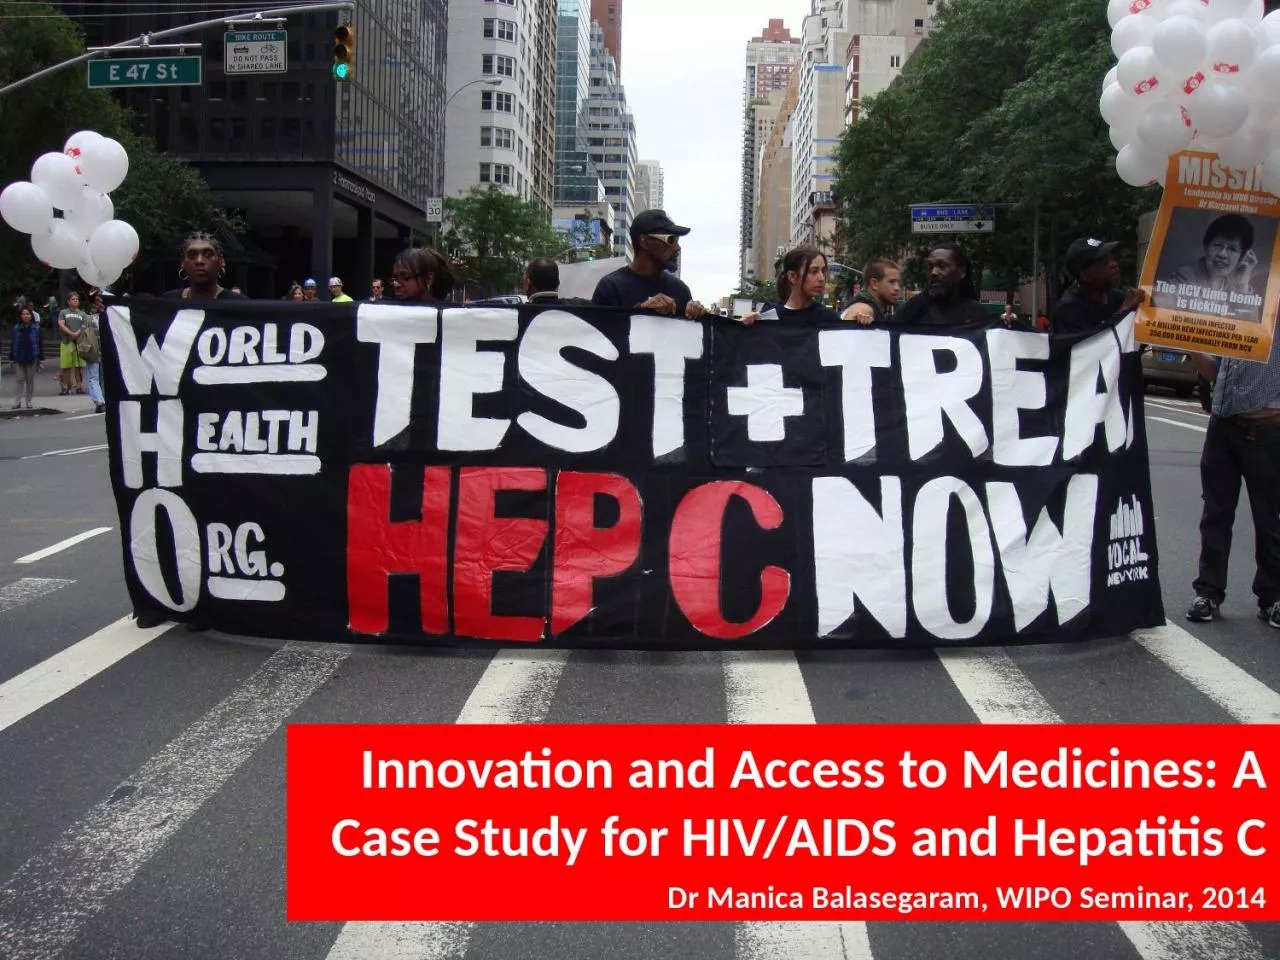 Innovation and Access to Medicines: A Case Study for HIV/AIDS and Hepatitis